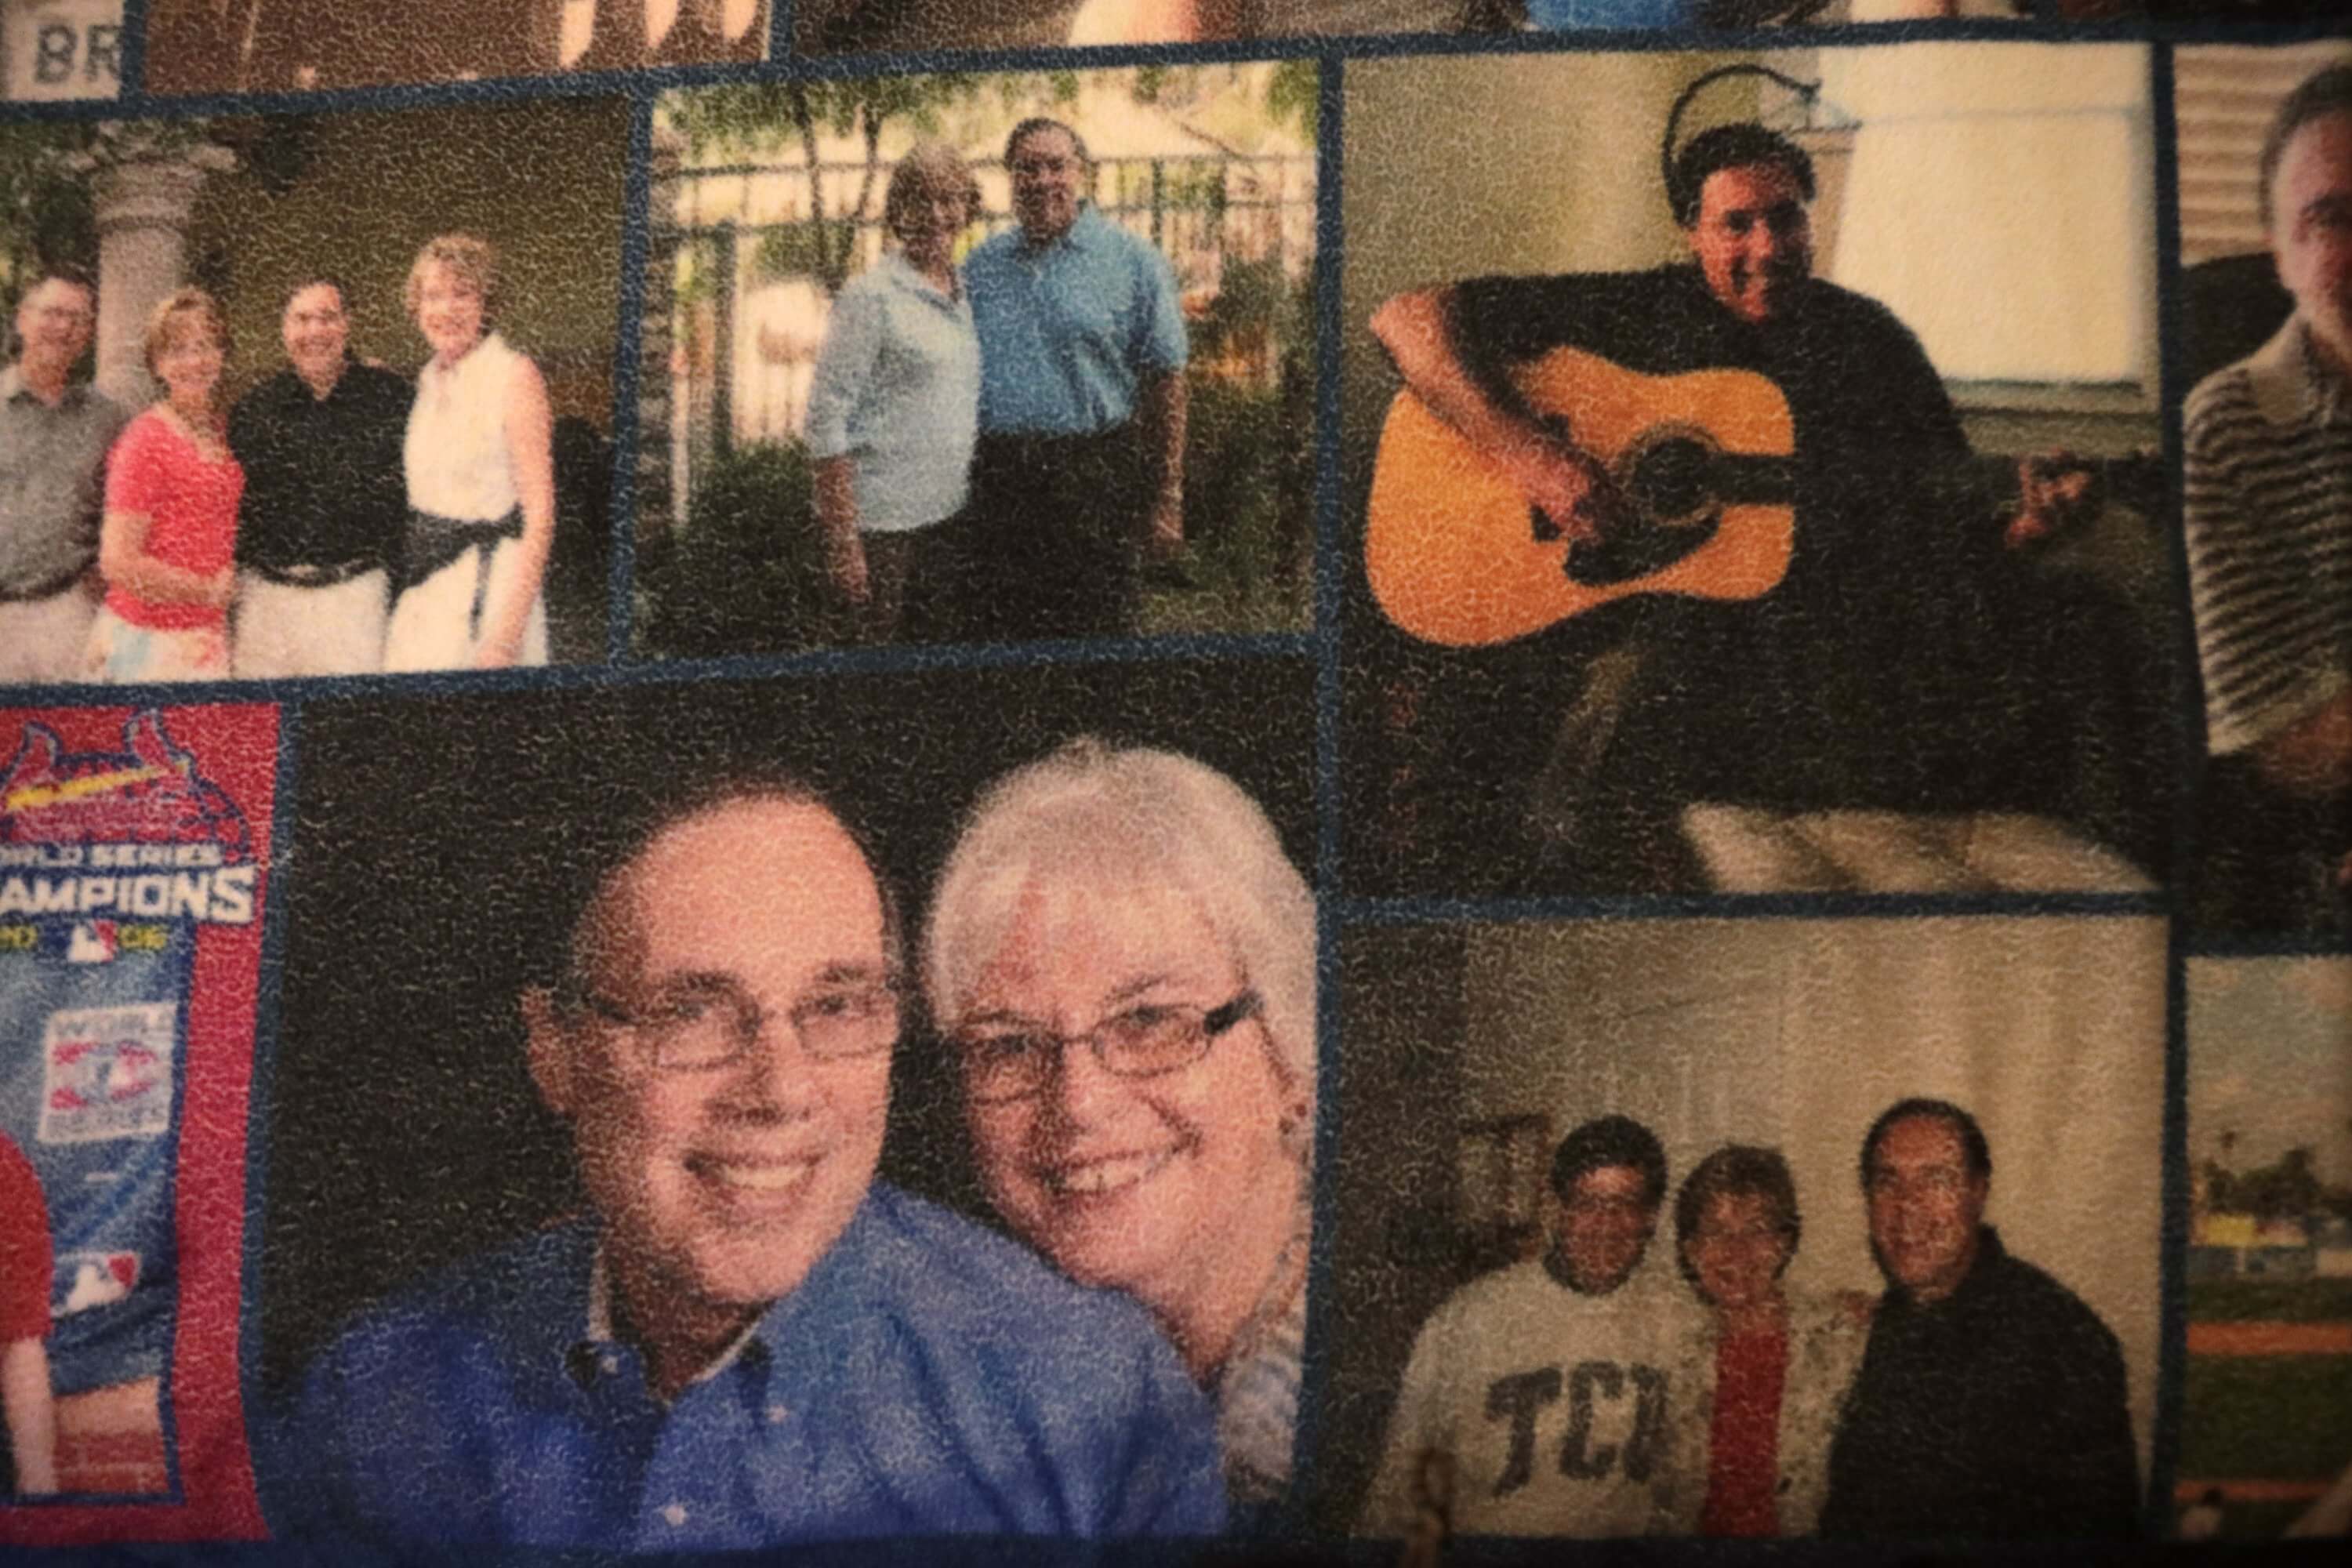 A blanket printed with family photos of Ron Nicoletti with family and friends lays across Nicoletti's bed at a skilled nursing facility in Valley Park on Thursday, Dec. 13, 2018. Ron was diagnosed with early onset Alzheimer's at age 60. His wife, Mary, visits almost every day.